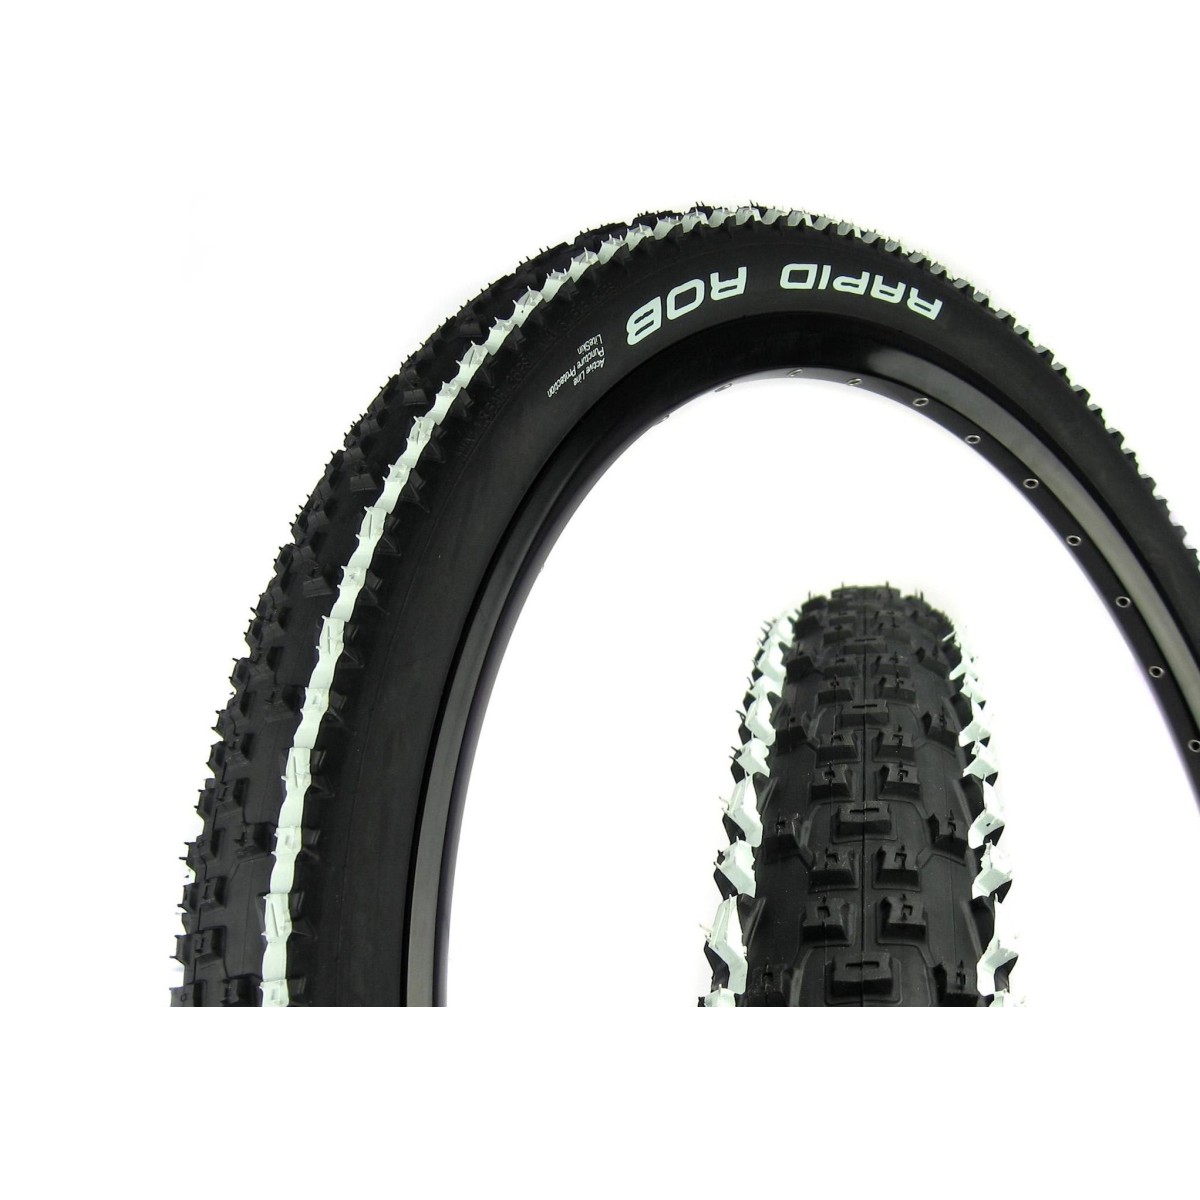 Bike Tyres Tubes And Wheels 1 Pair Schwalbe Rapid Rob 26 X 210 Mountain